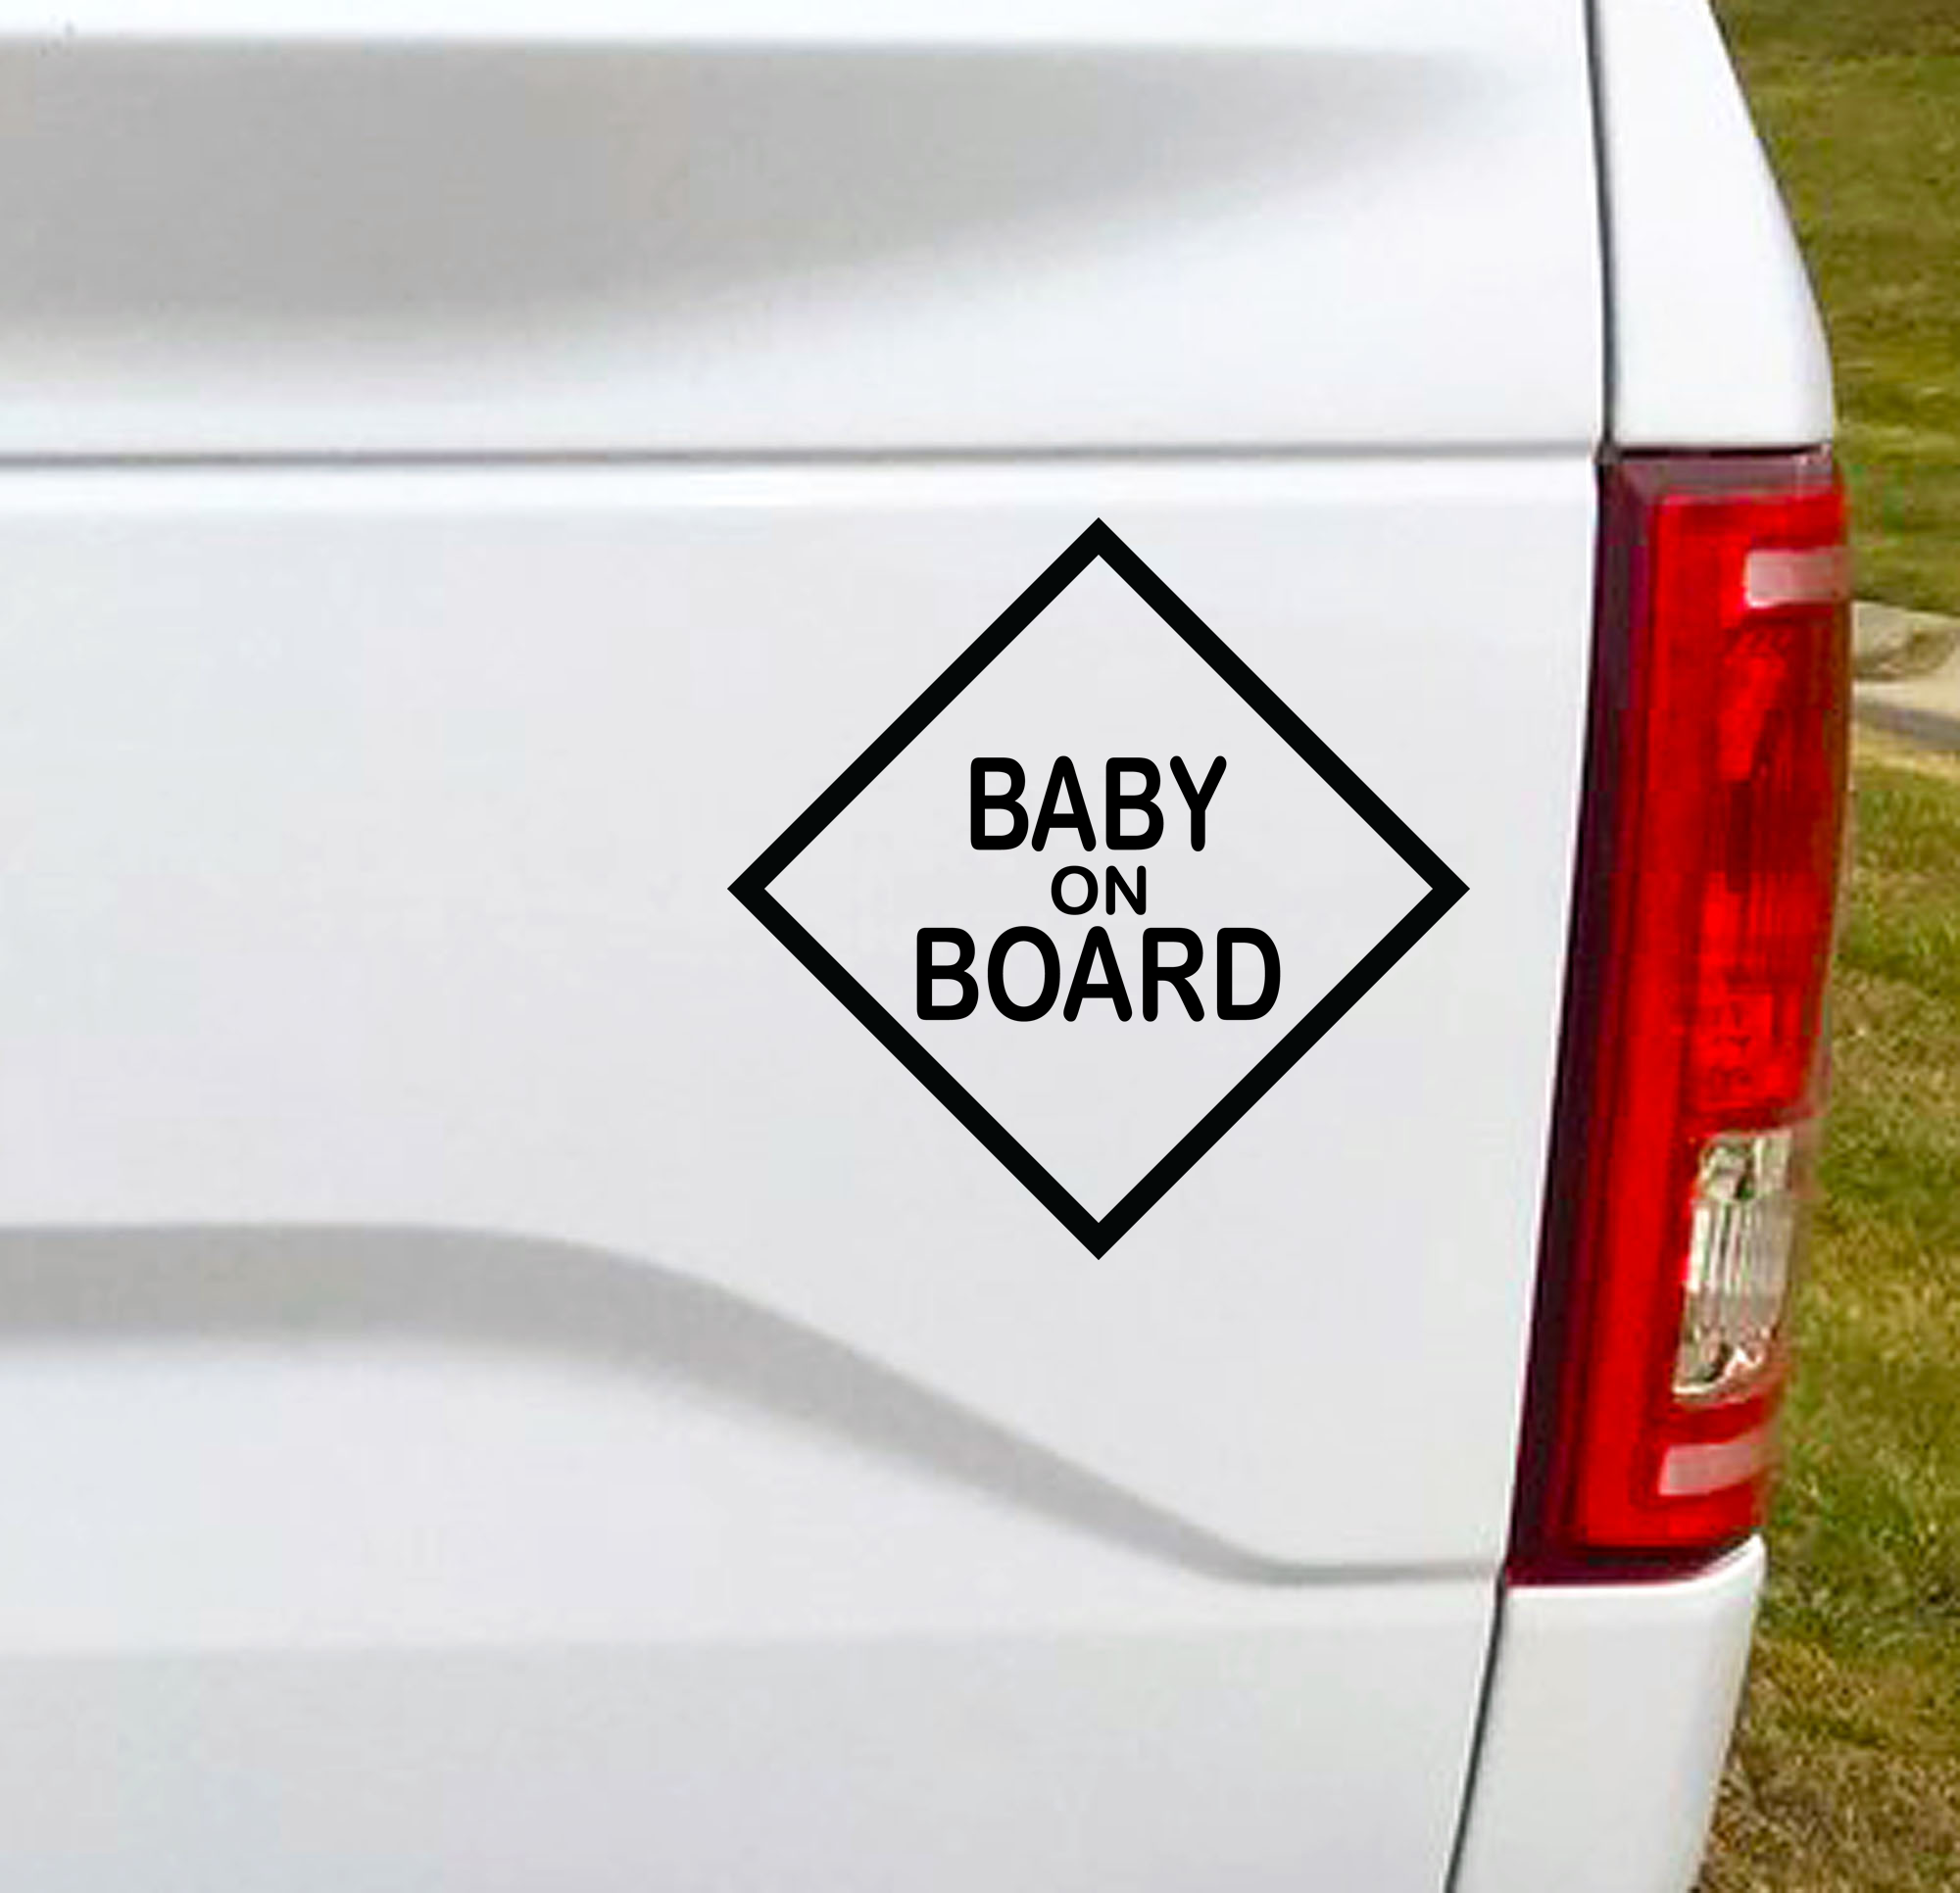 This Baby on Board car decal will inform your fellow drivers that you have precious cargo on board...and hopefully make them rethink how close they are driving behind you. 5"W x 5"H Car Decal, Car Sticker, Car Vinyl, Bumper Sticker, Vinyl Stickers, Vinyl Sticker.